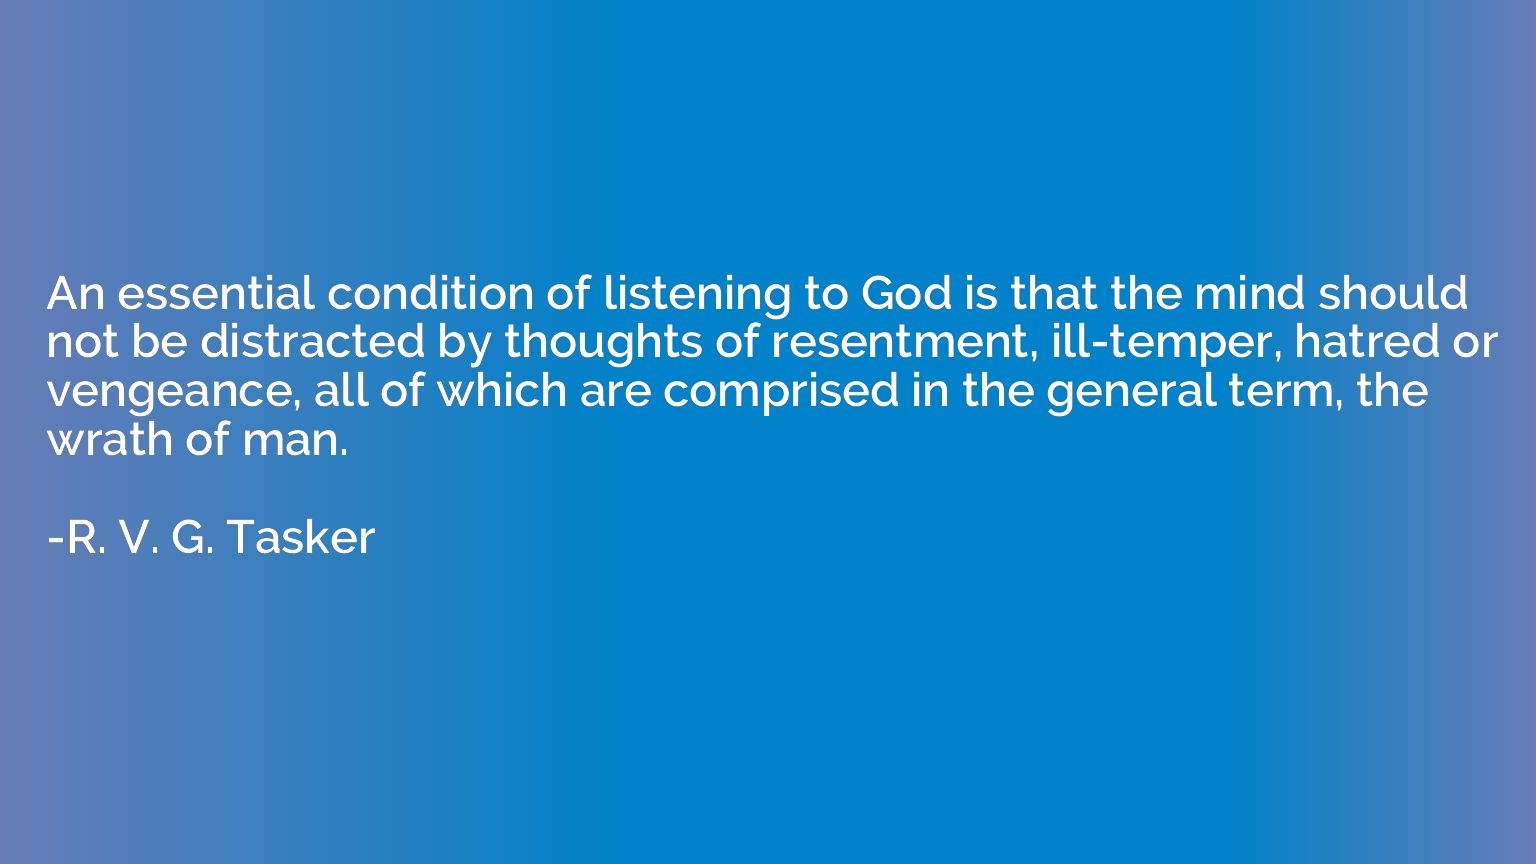 An essential condition of listening to God is that the mind 